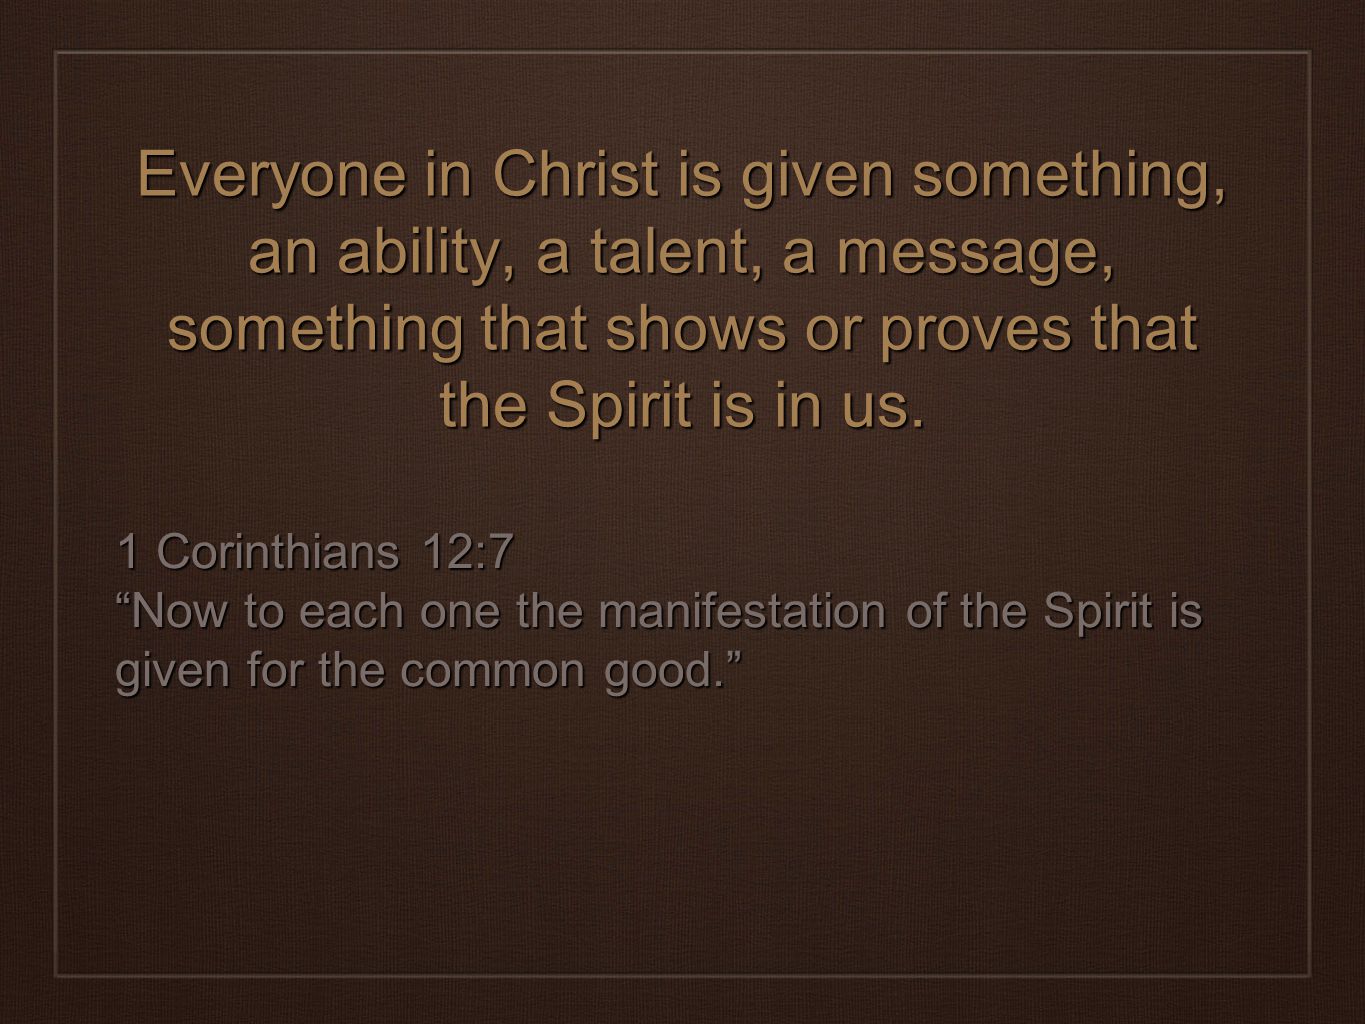 Everyone in Christ is given something, an ability, a talent, a message, something that shows or proves that the Spirit is in us.